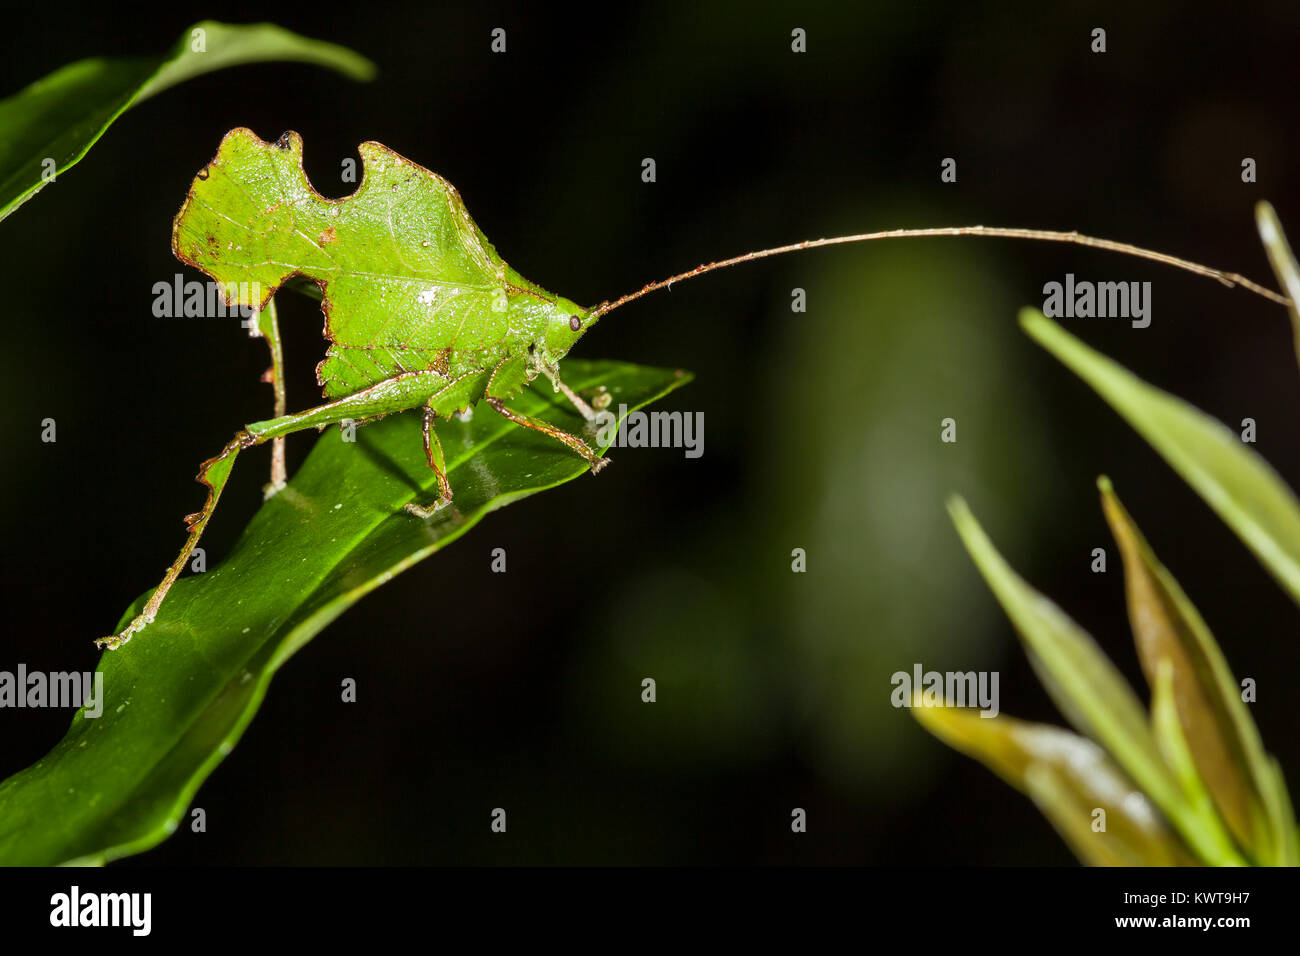 An exceptionally well-camouflaged katydid, resembling a chewed leaf. This is an excellent example of crypsis. Stock Photo